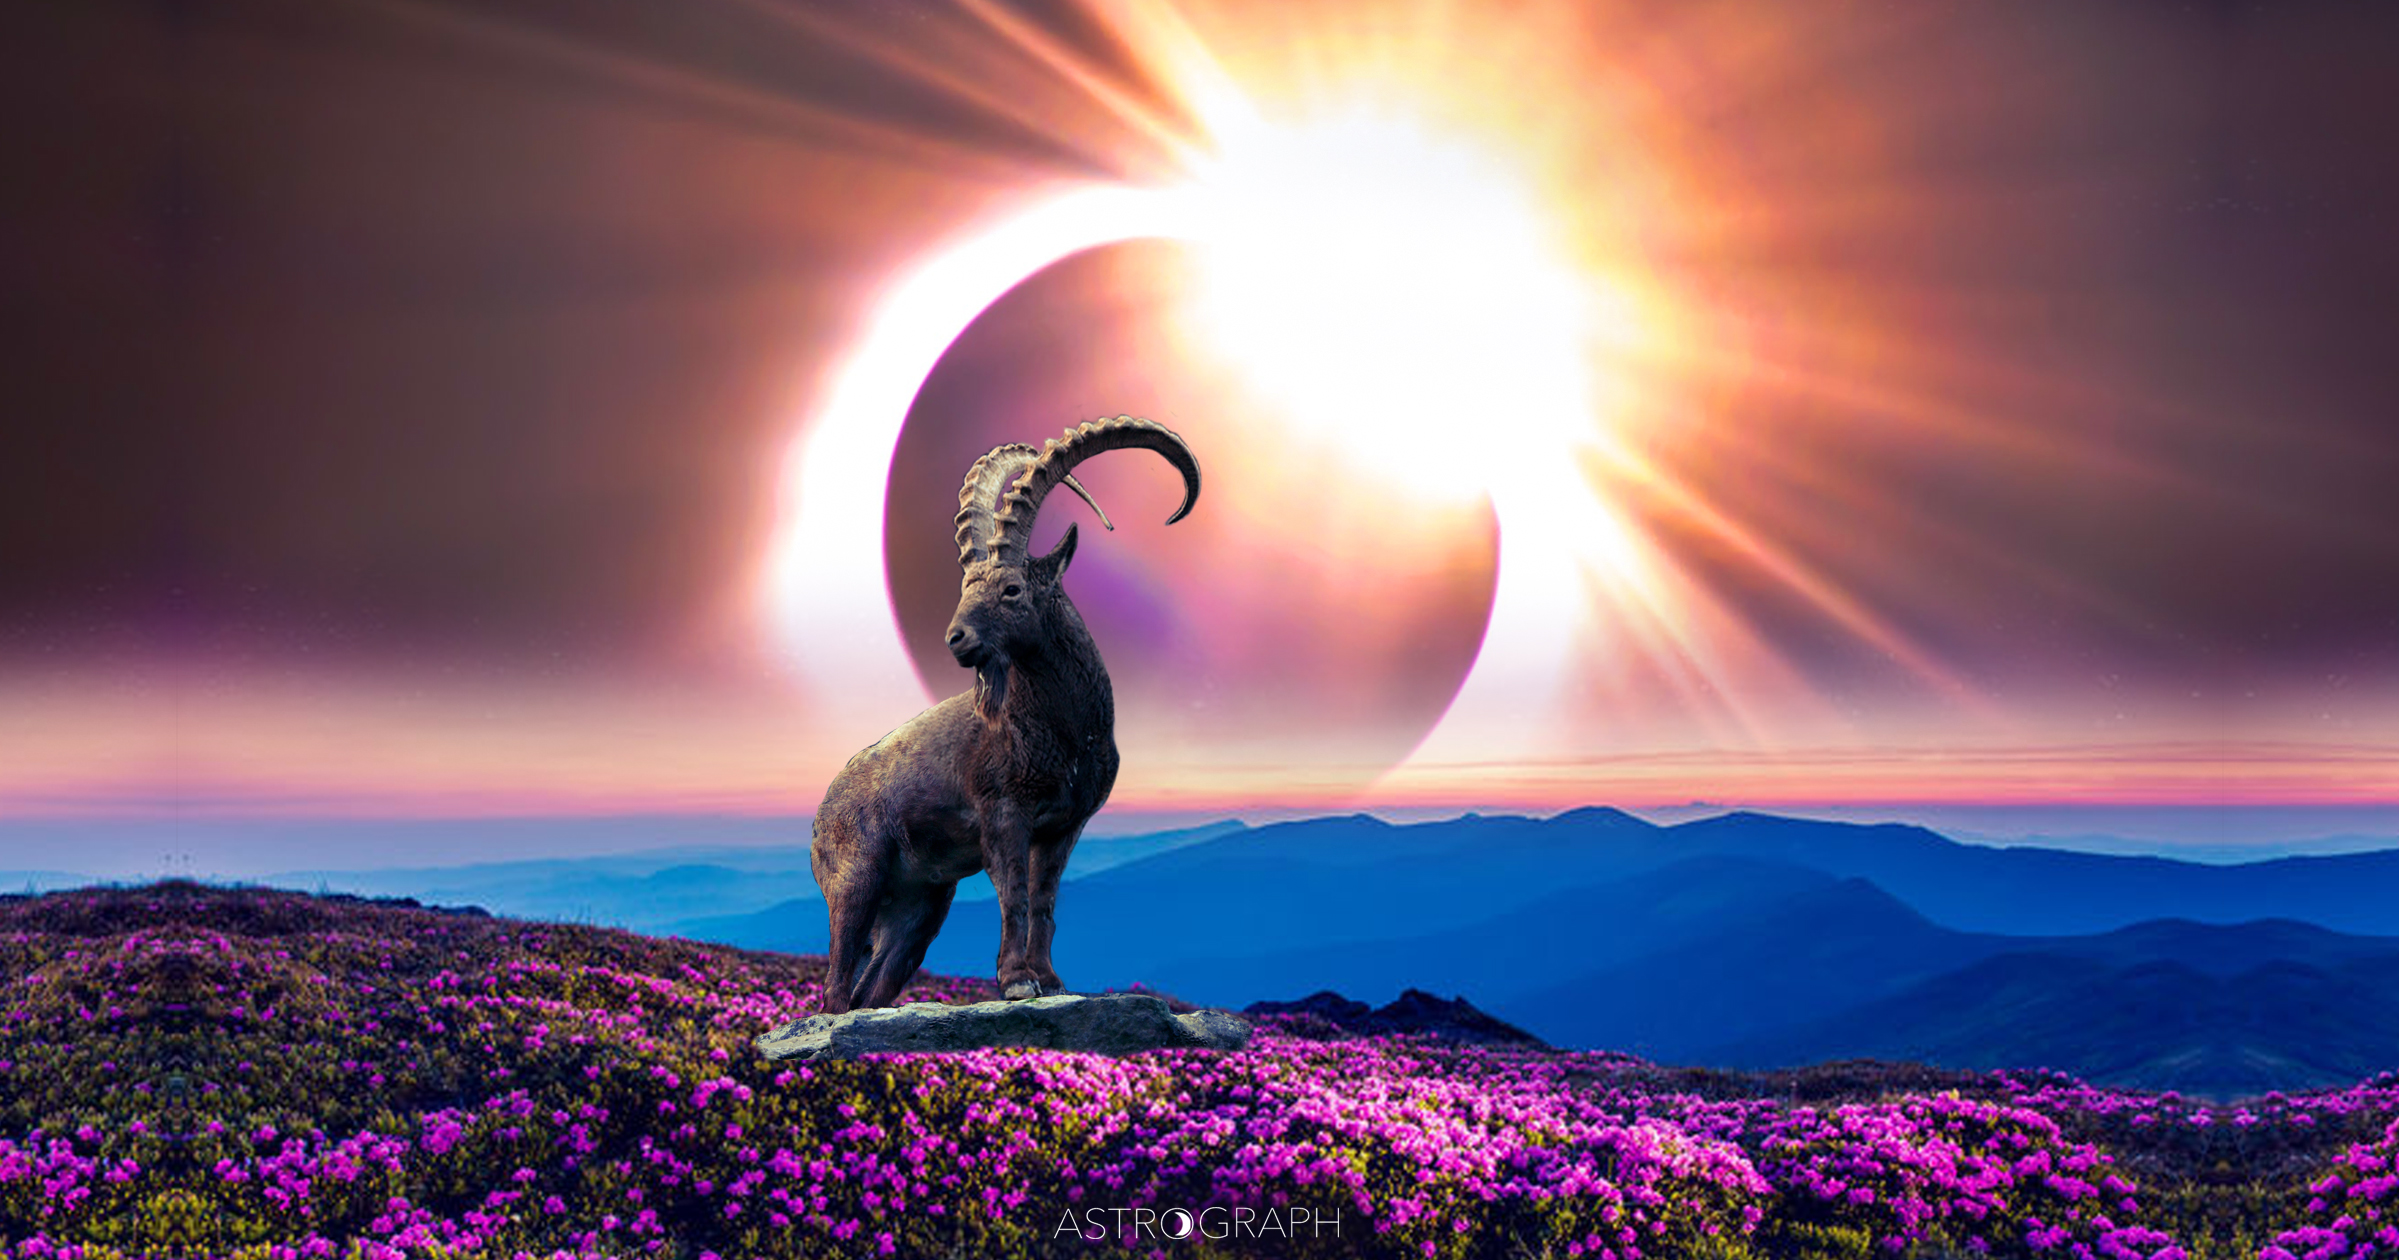 A New Moon Eclipse of Continued Transformational Intention